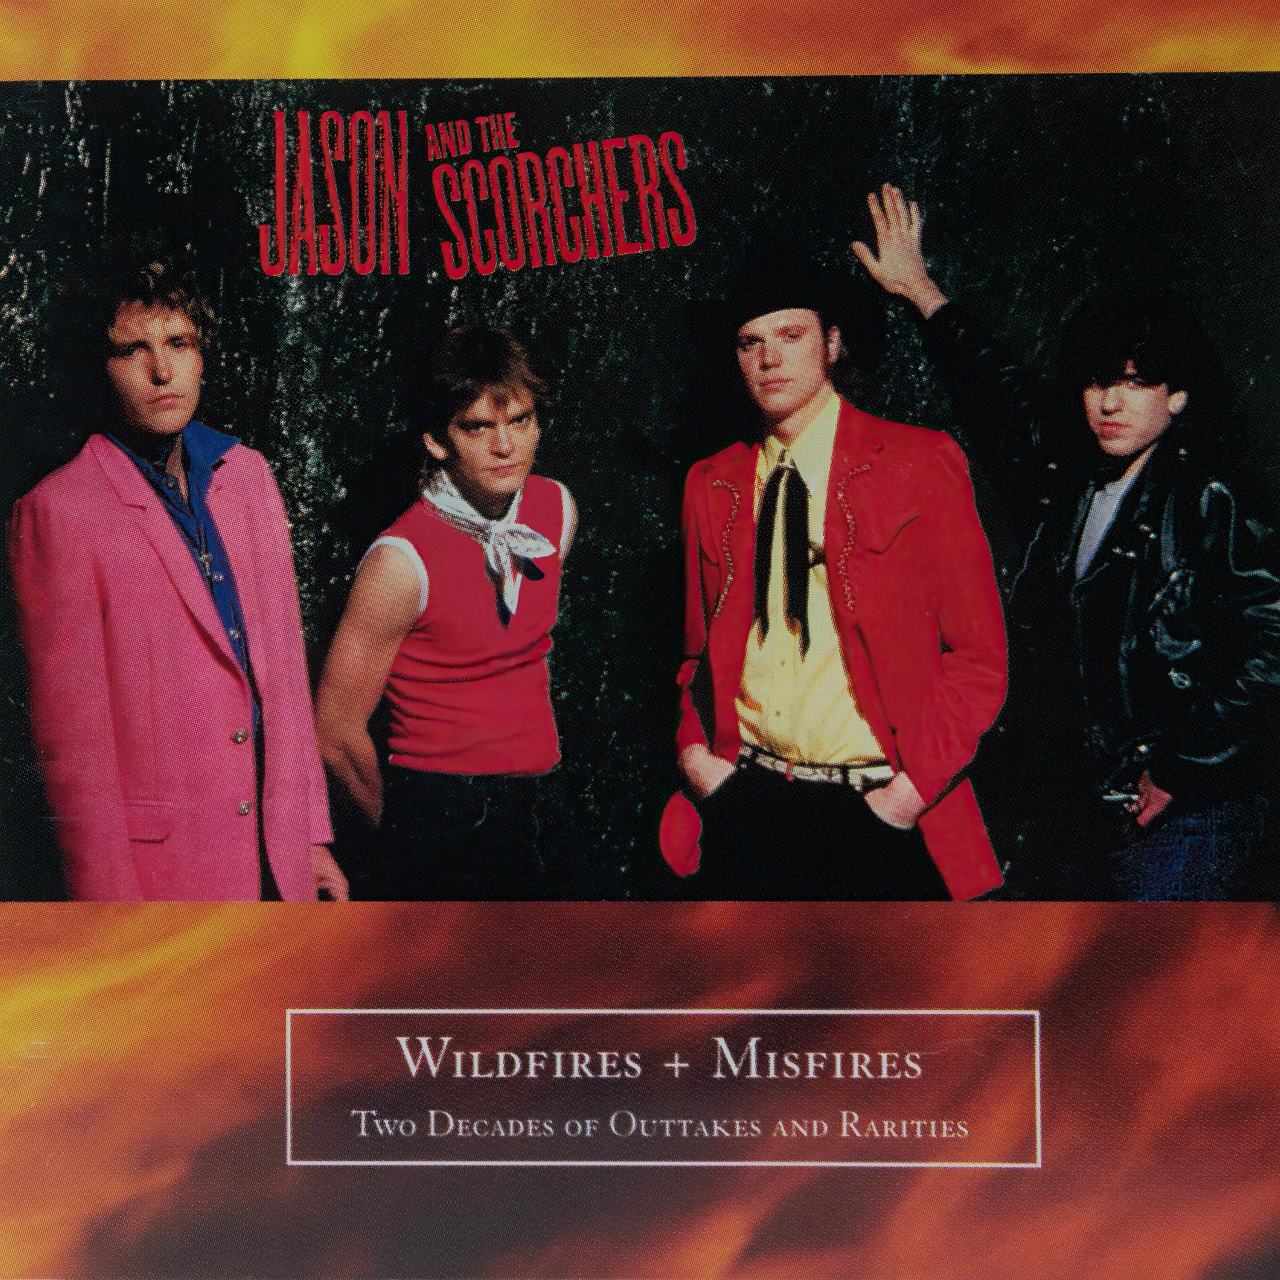 Jason And The Scorchers – Wildifres + Misfires cover album